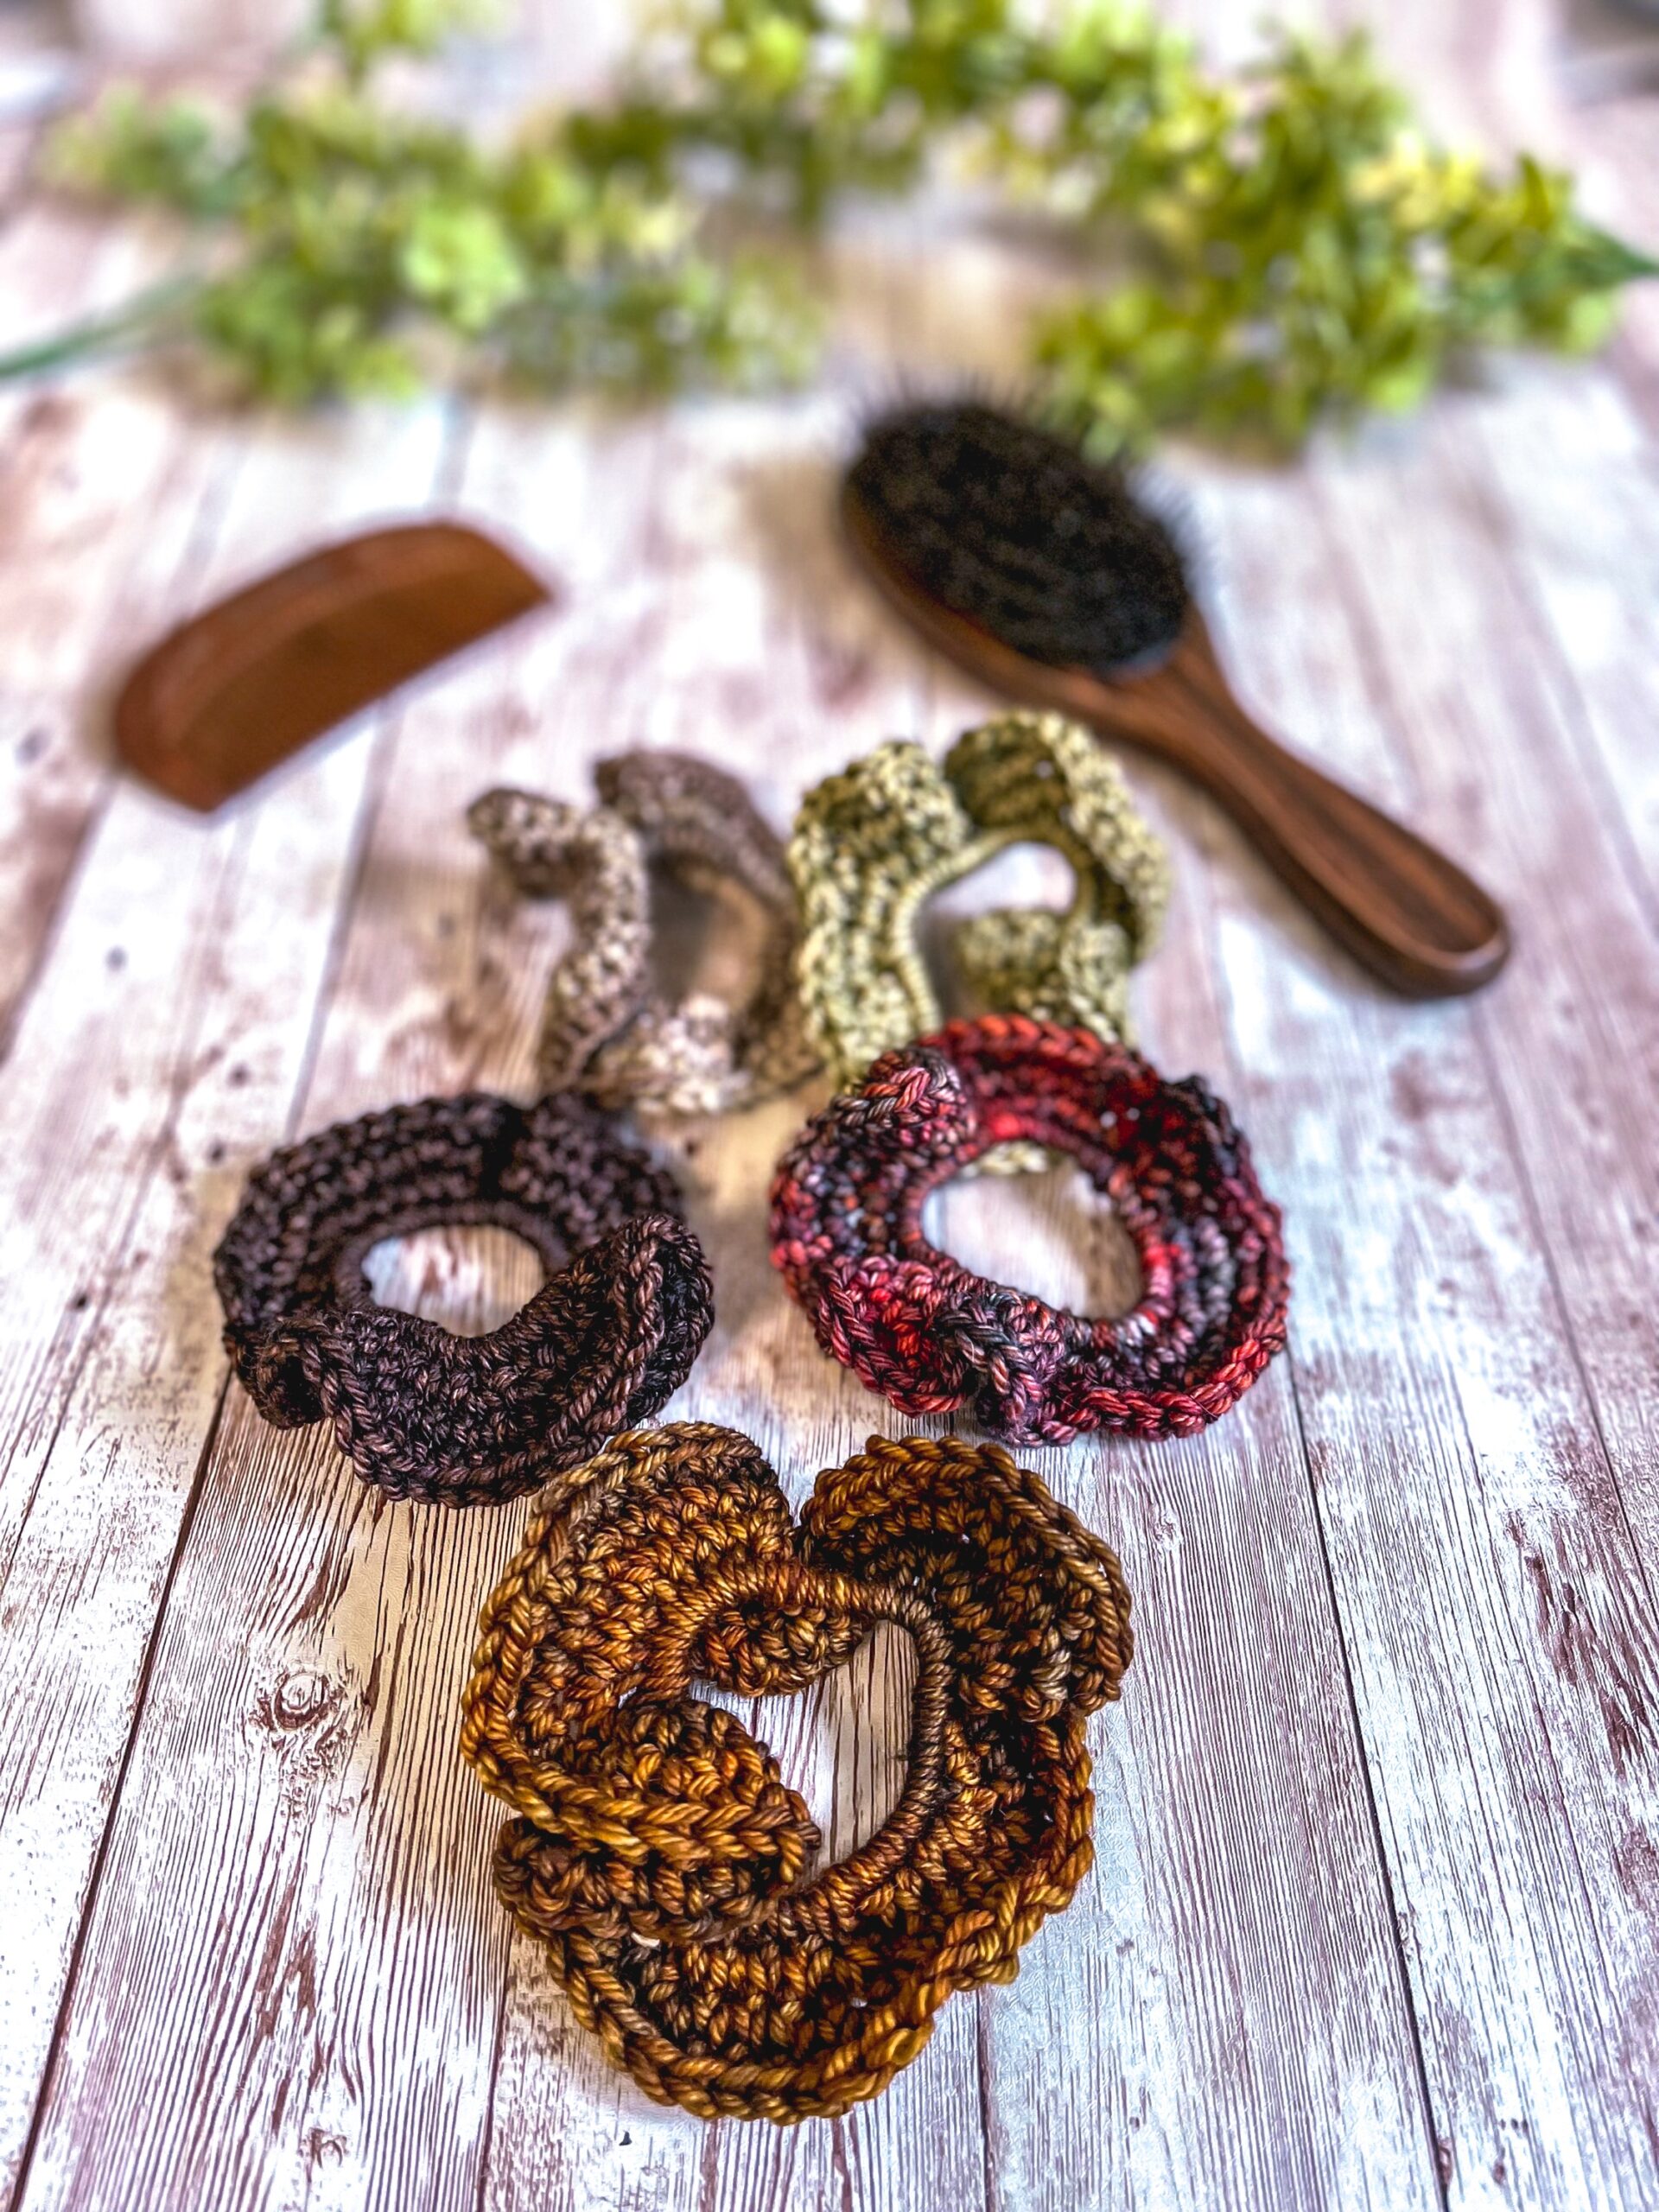 A set of 5 ruffled hair bands made with hand-dyed merino rests on a wood plank with a wood brush, wood comb, and greenery in the background. The earthy toned colors include a copper, brown, rustic green, brownish/gray, and a blend of oranges, reds, and browns.